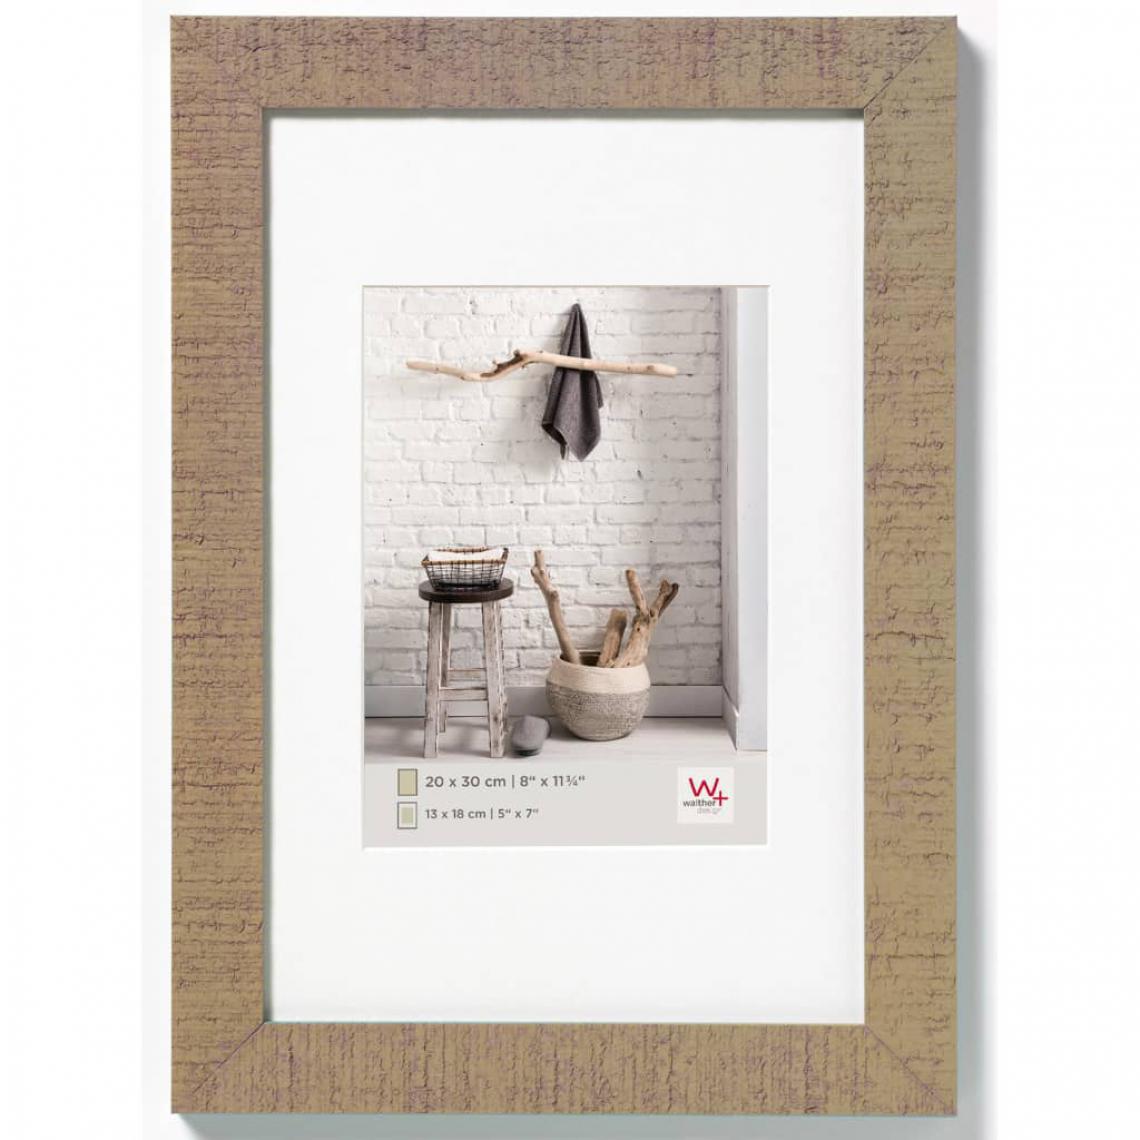 Walther - Walther Design Cadre photo Home 30x45 cm Marron beige - Cadres, pêle-mêle